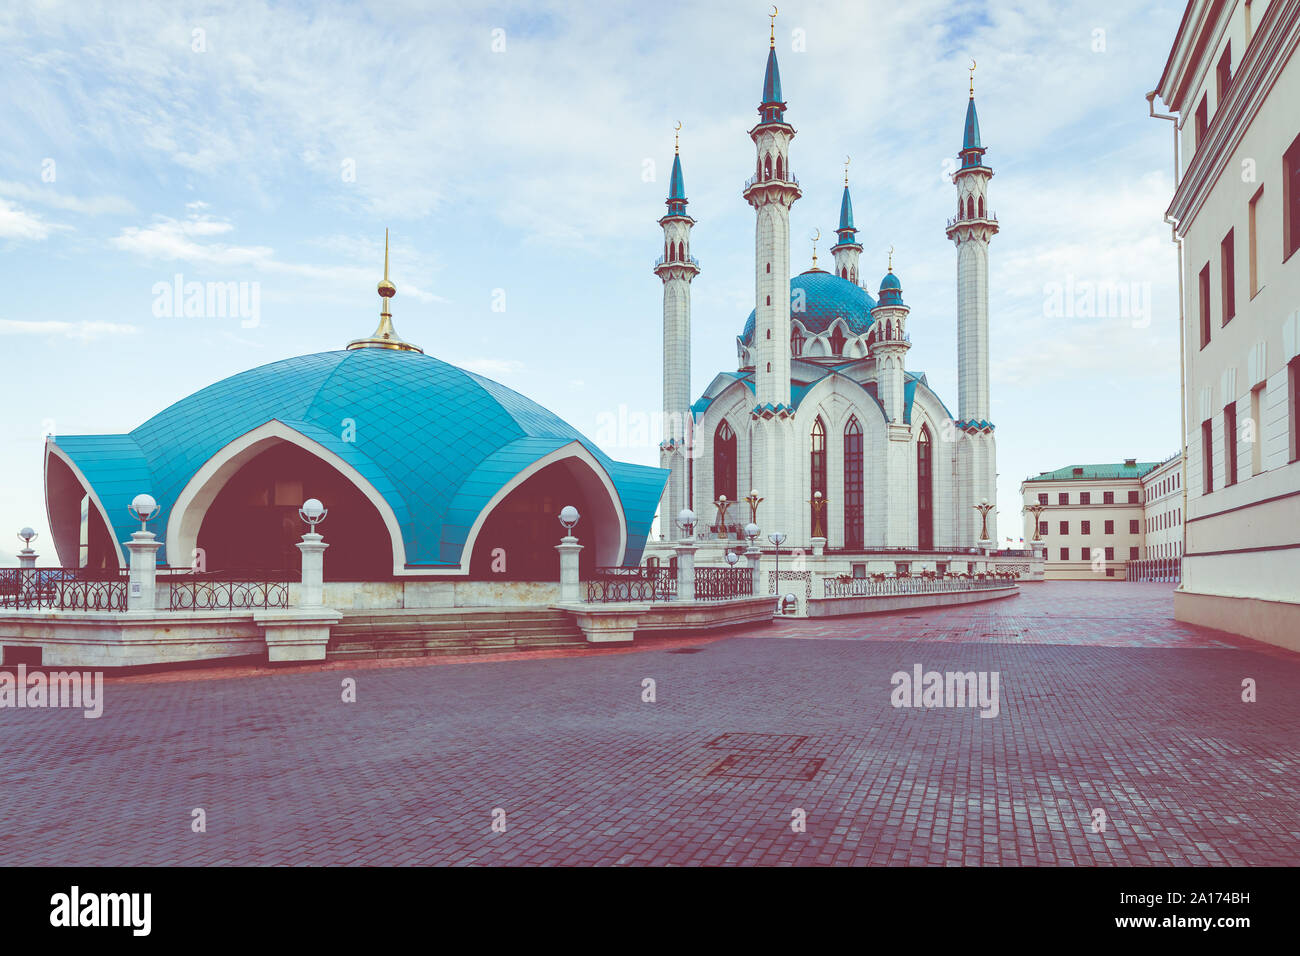 KAZAN, RUSSIA - SEPTEMBER 15, 2019: View on Kul Sharif mosque in Kazan Kremlin, one of the largest mosques in Russia. The Republic of Tatarstan in Rus Stock Photo